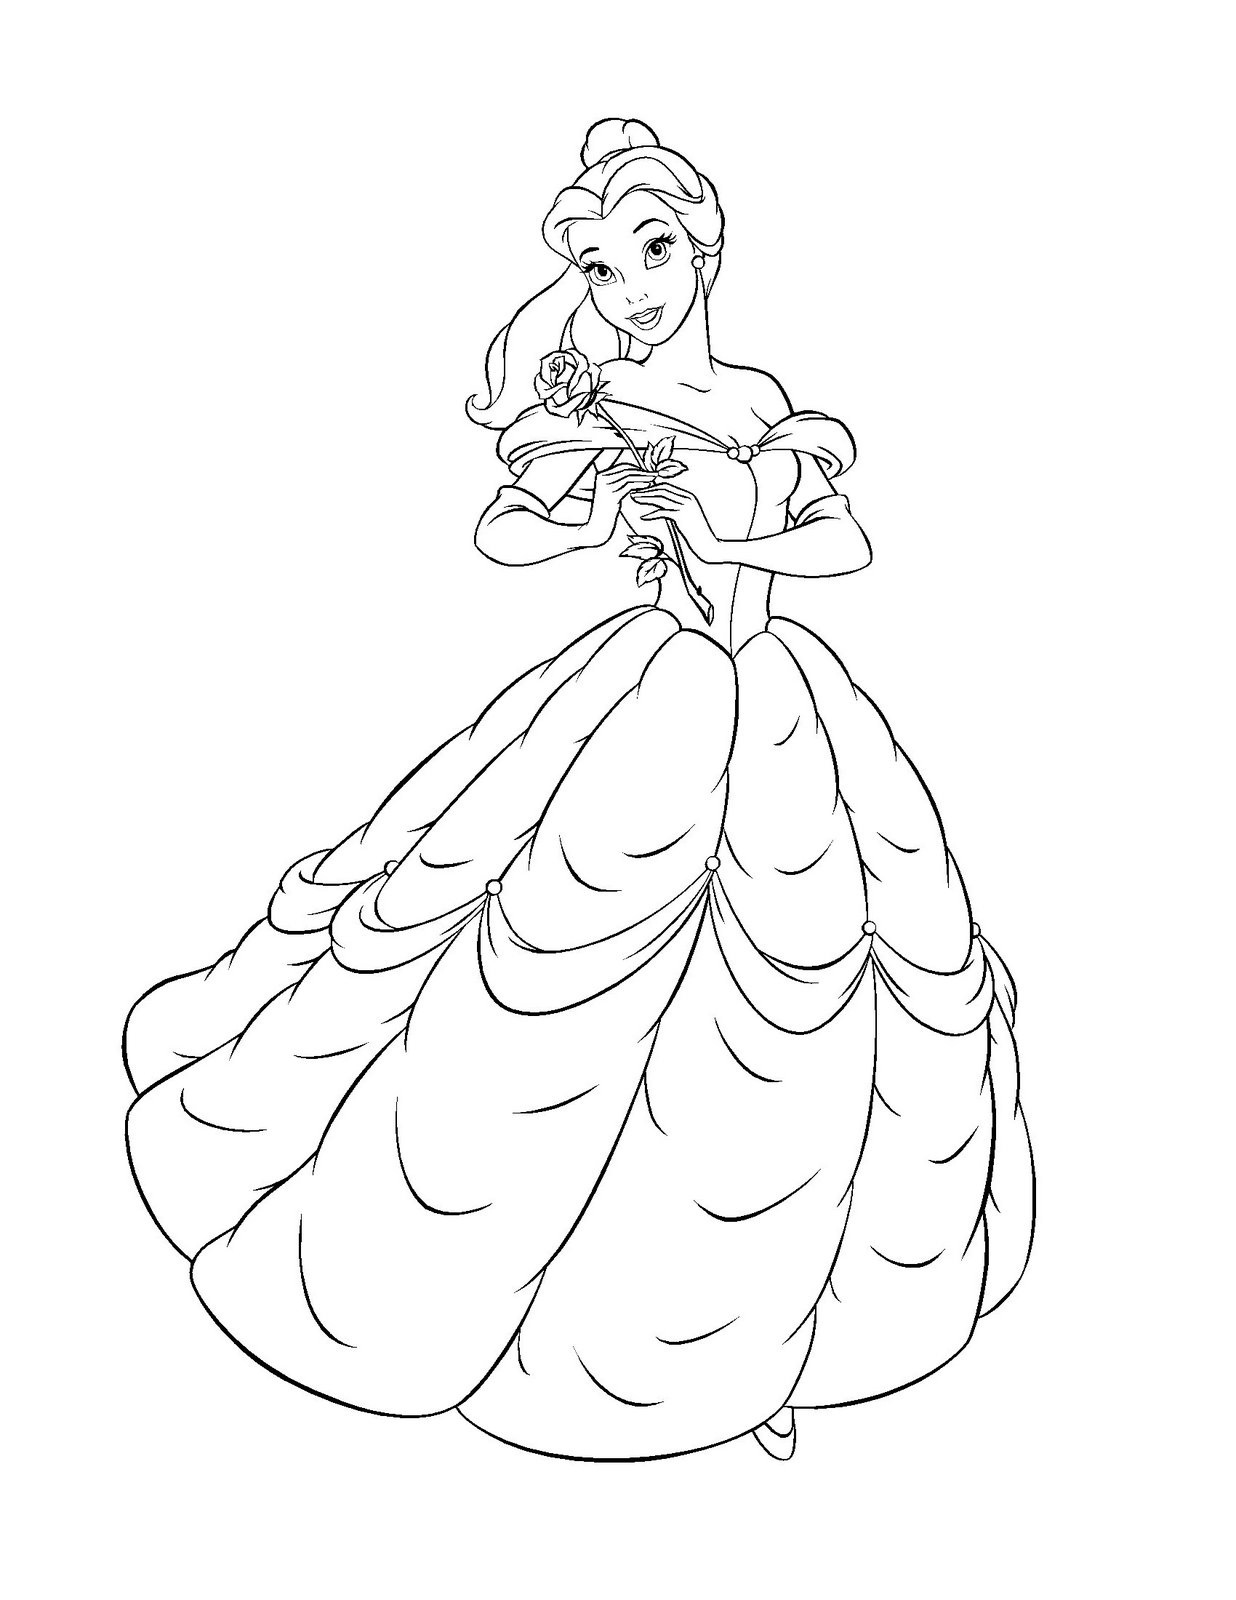 Disney Princess Coloring Pages Belle At GetColorings Free Printable Colorings Pages To